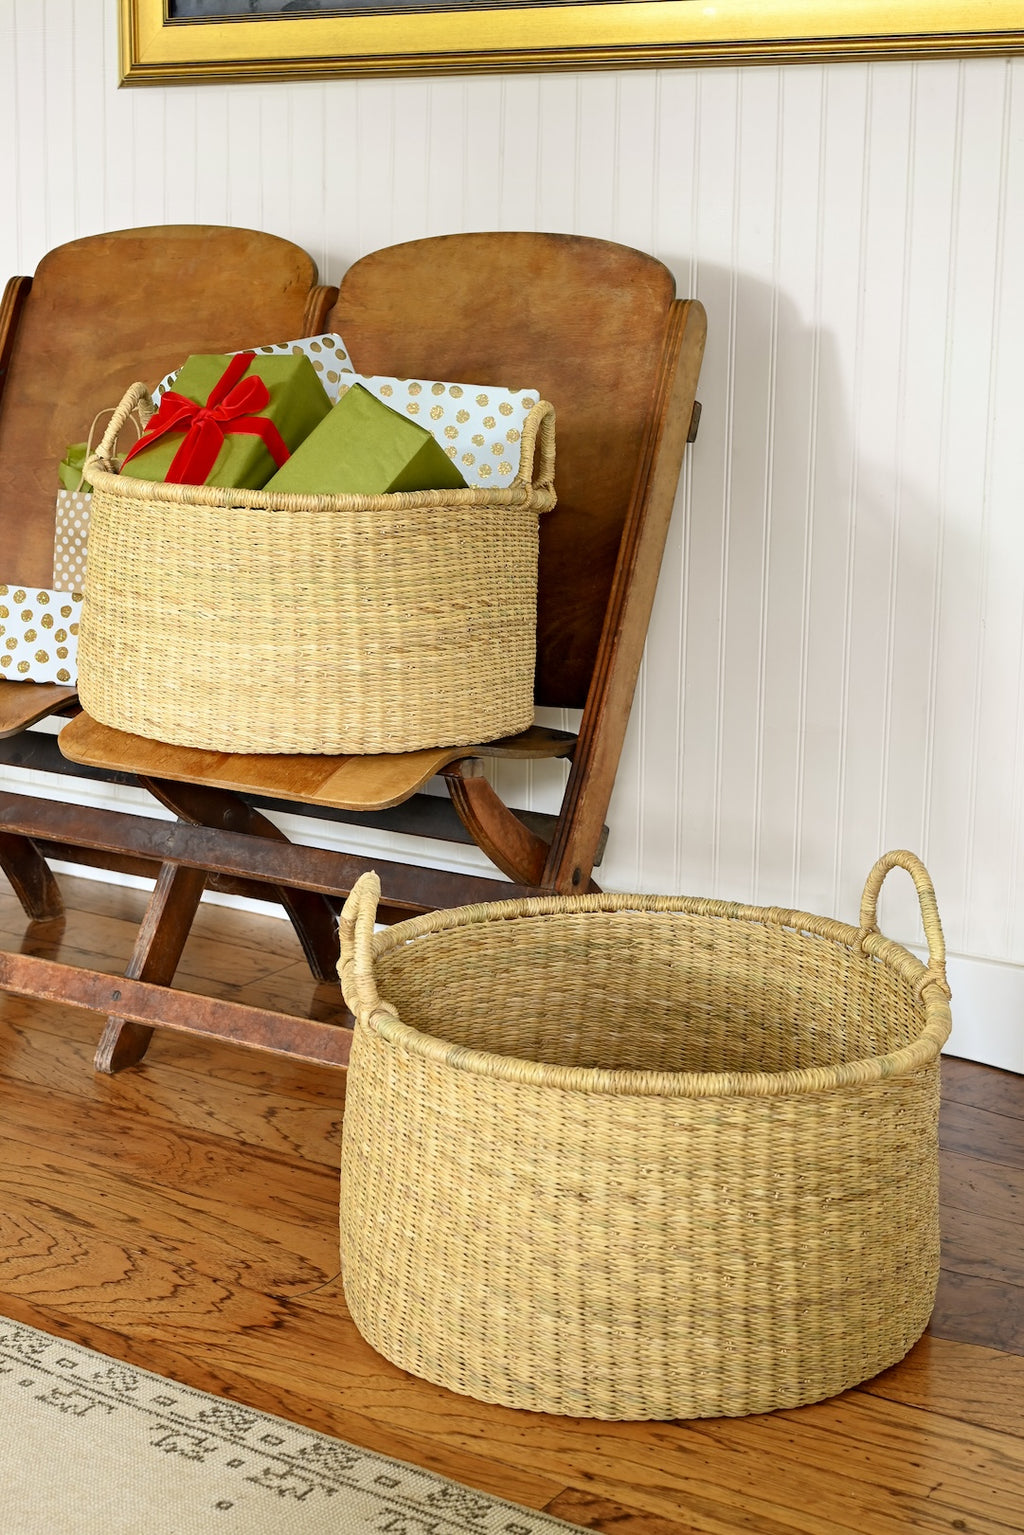 Set of Two Natural Woven Grass Floor Baskets